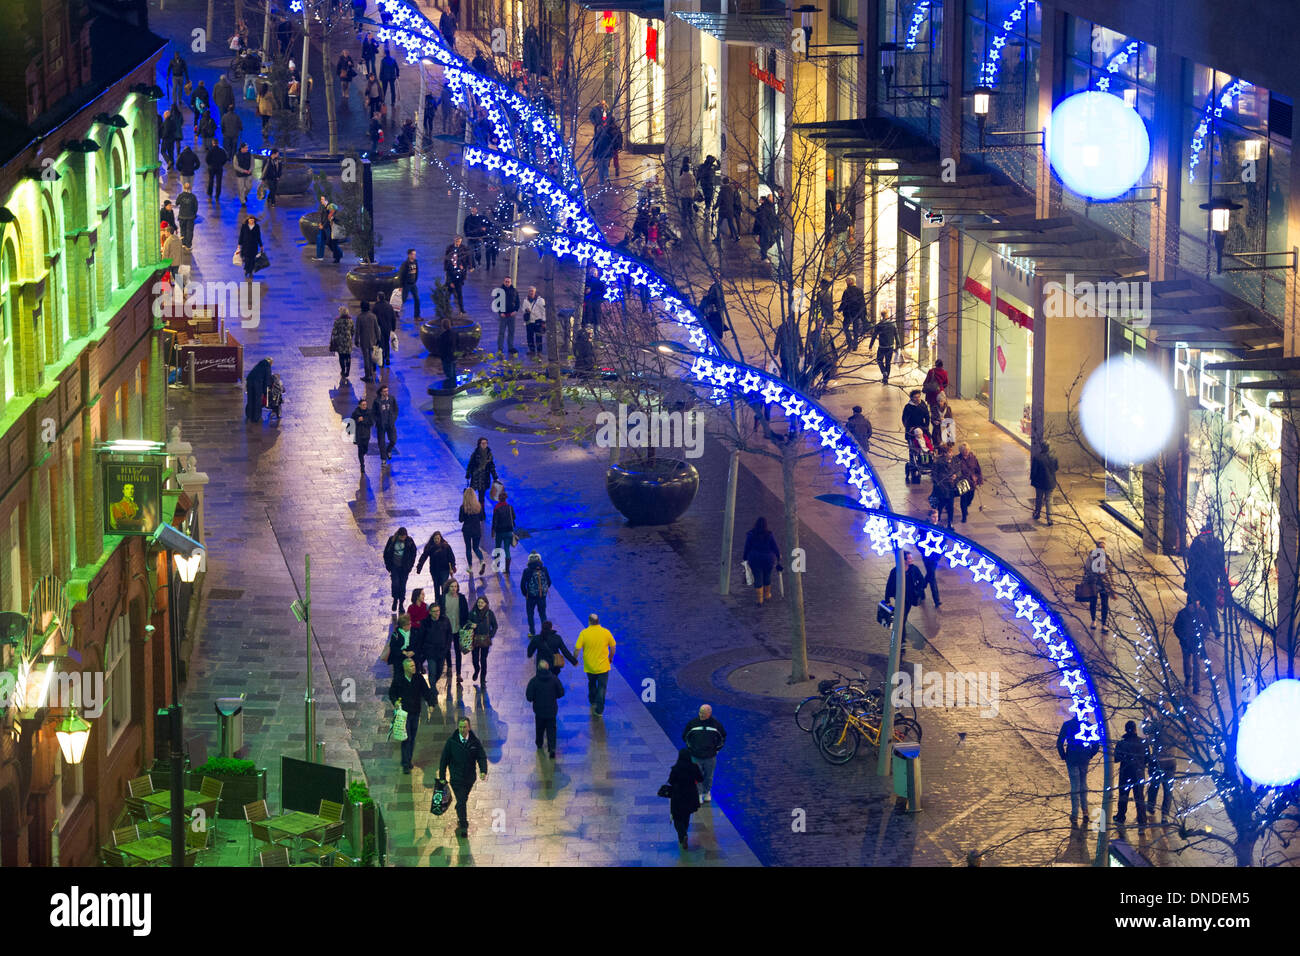 Cardiff, Wales, UK. December 23. Christmas shoppers brave bad weather late on Mega Monday to go shopping for last minute presents on December 23 Cardiff, Wales. Shoppers are expected to spend £12 billion in four days. Some shops have already started their sales. (Photo by Matthew Horwood/Alamy Live News) Stock Photo